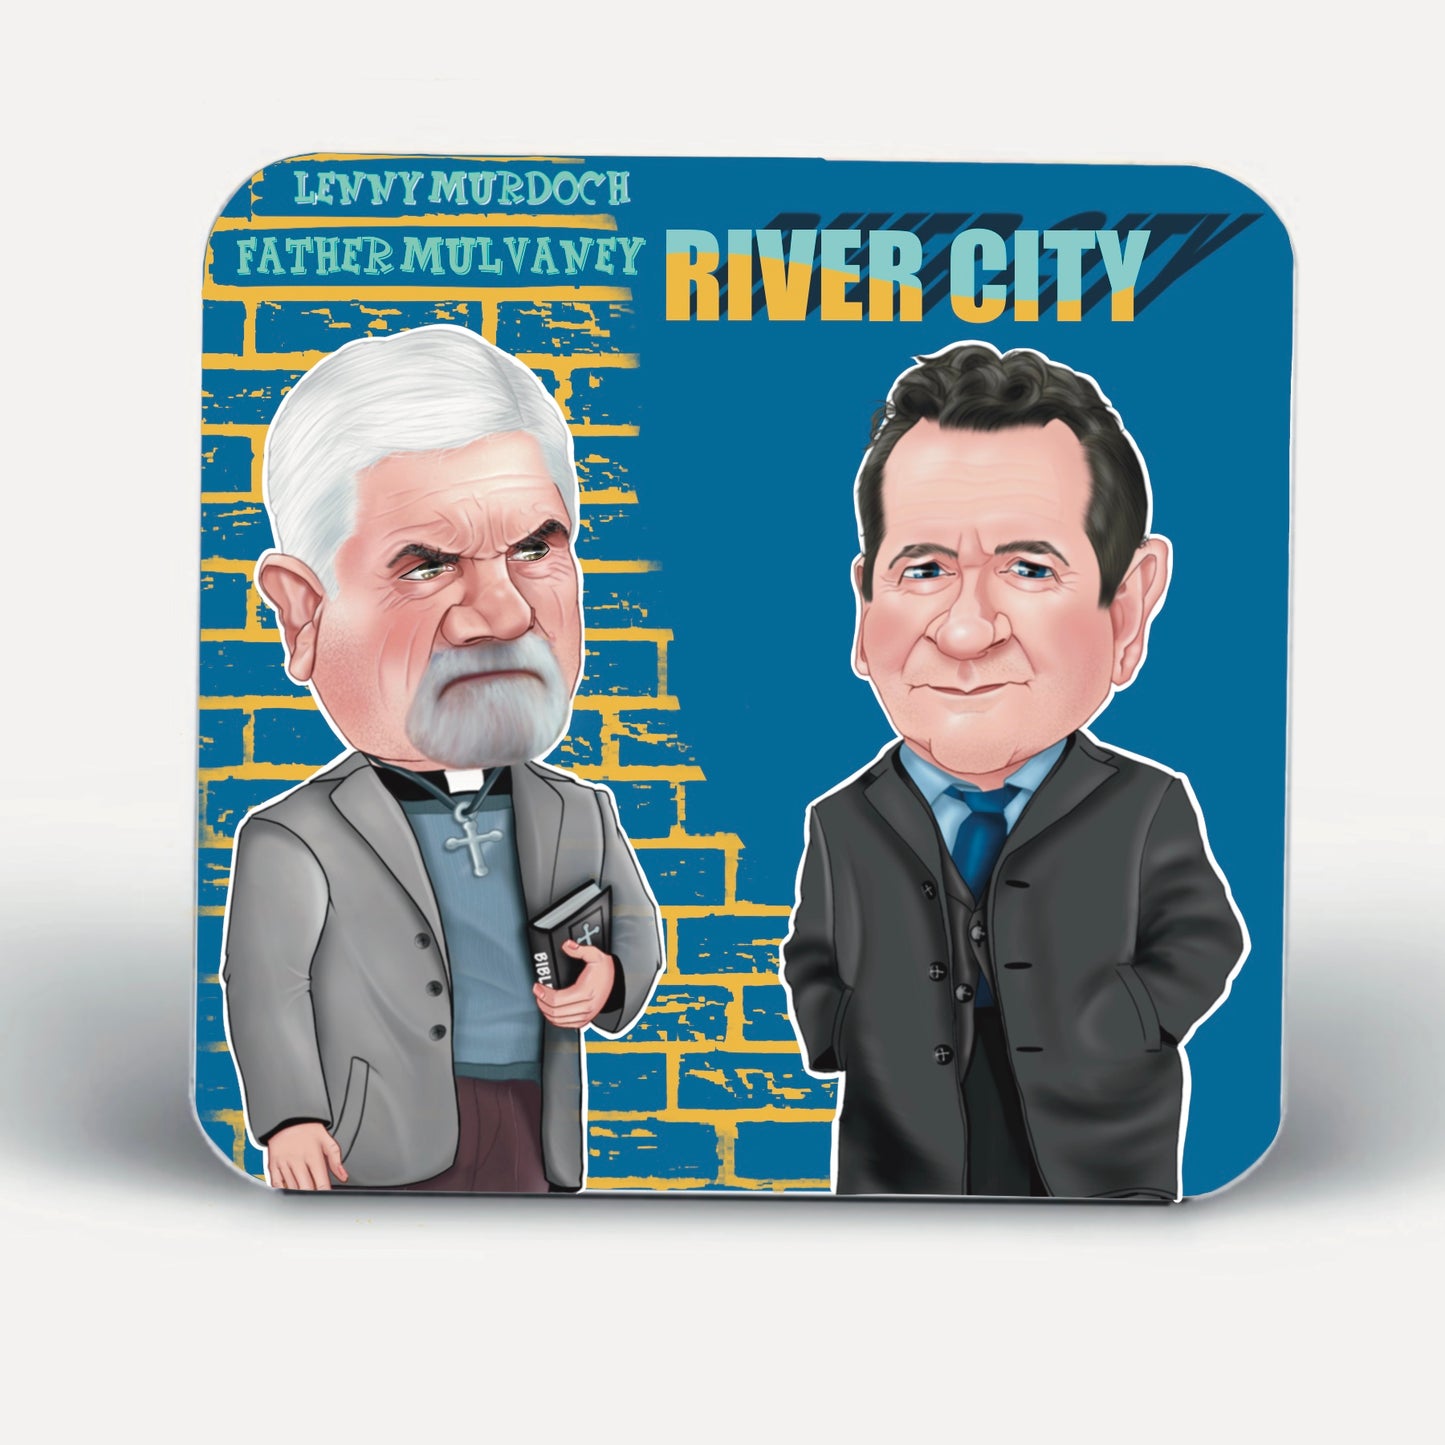 River City Coasters-Coasters Lenny Murdoch and Father Mulvaney #caricatures #rivercity